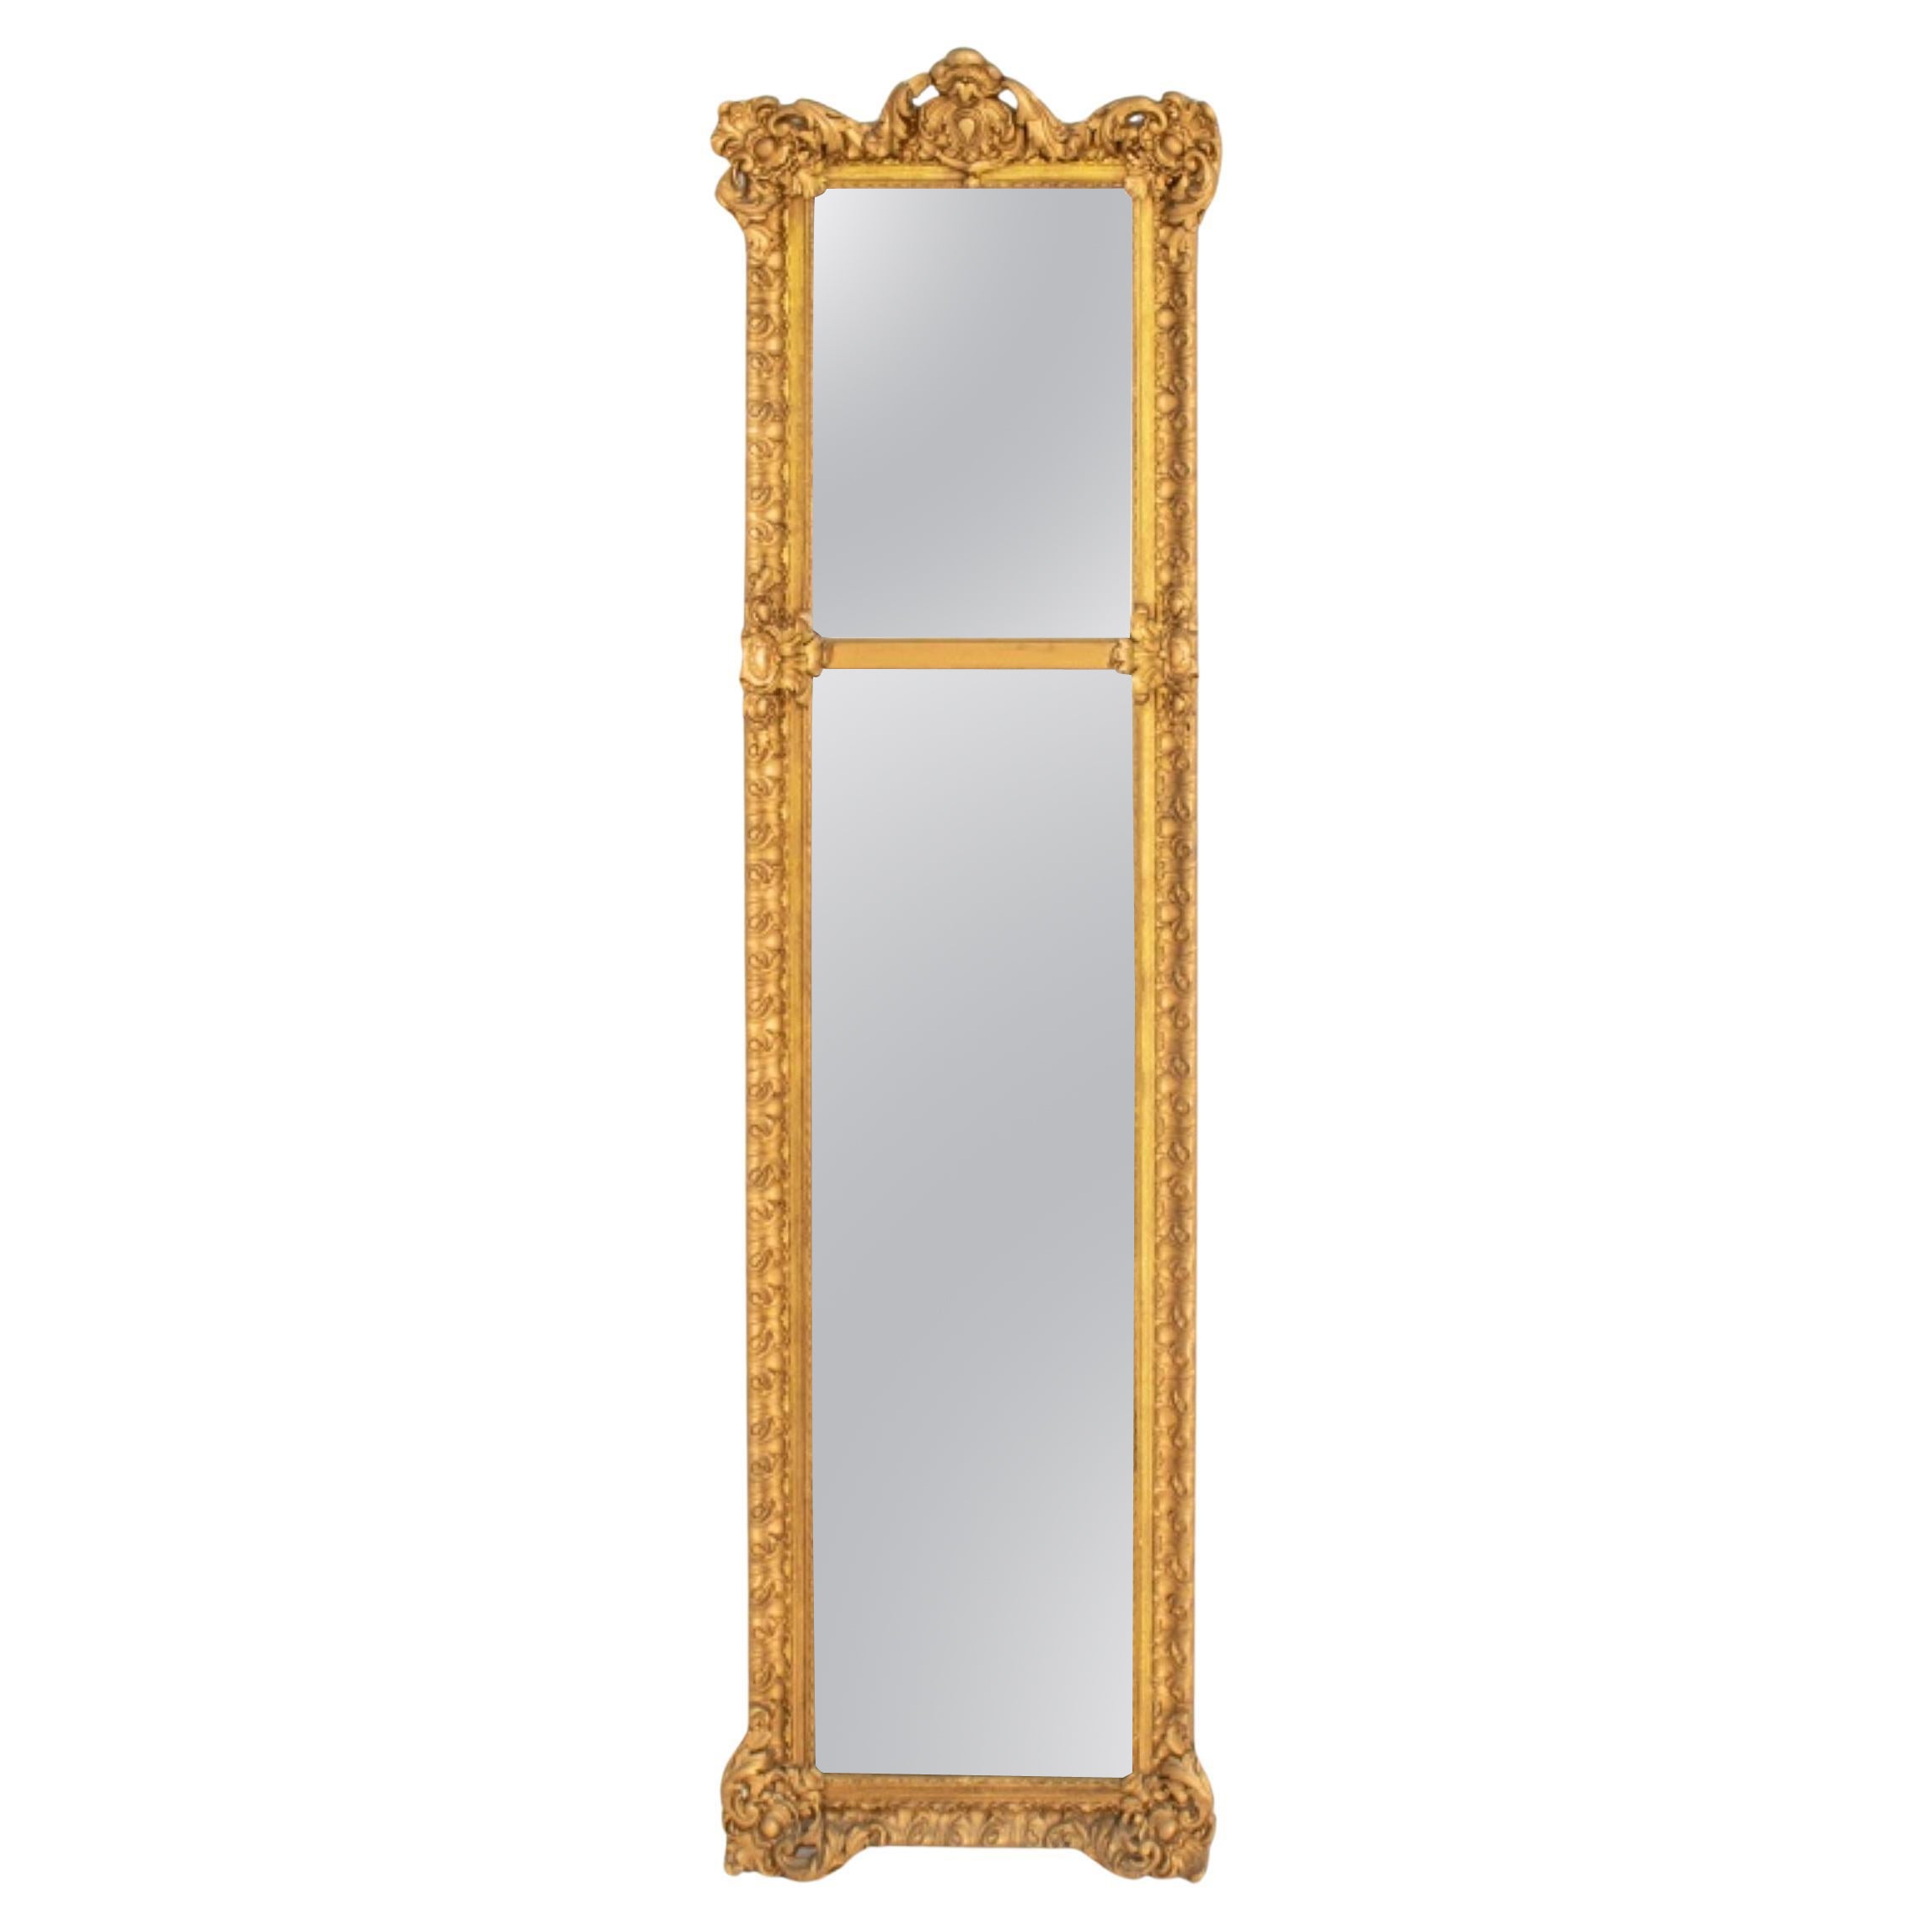 Napoleon III Carved Giltwood Mirror, 19th C. For Sale